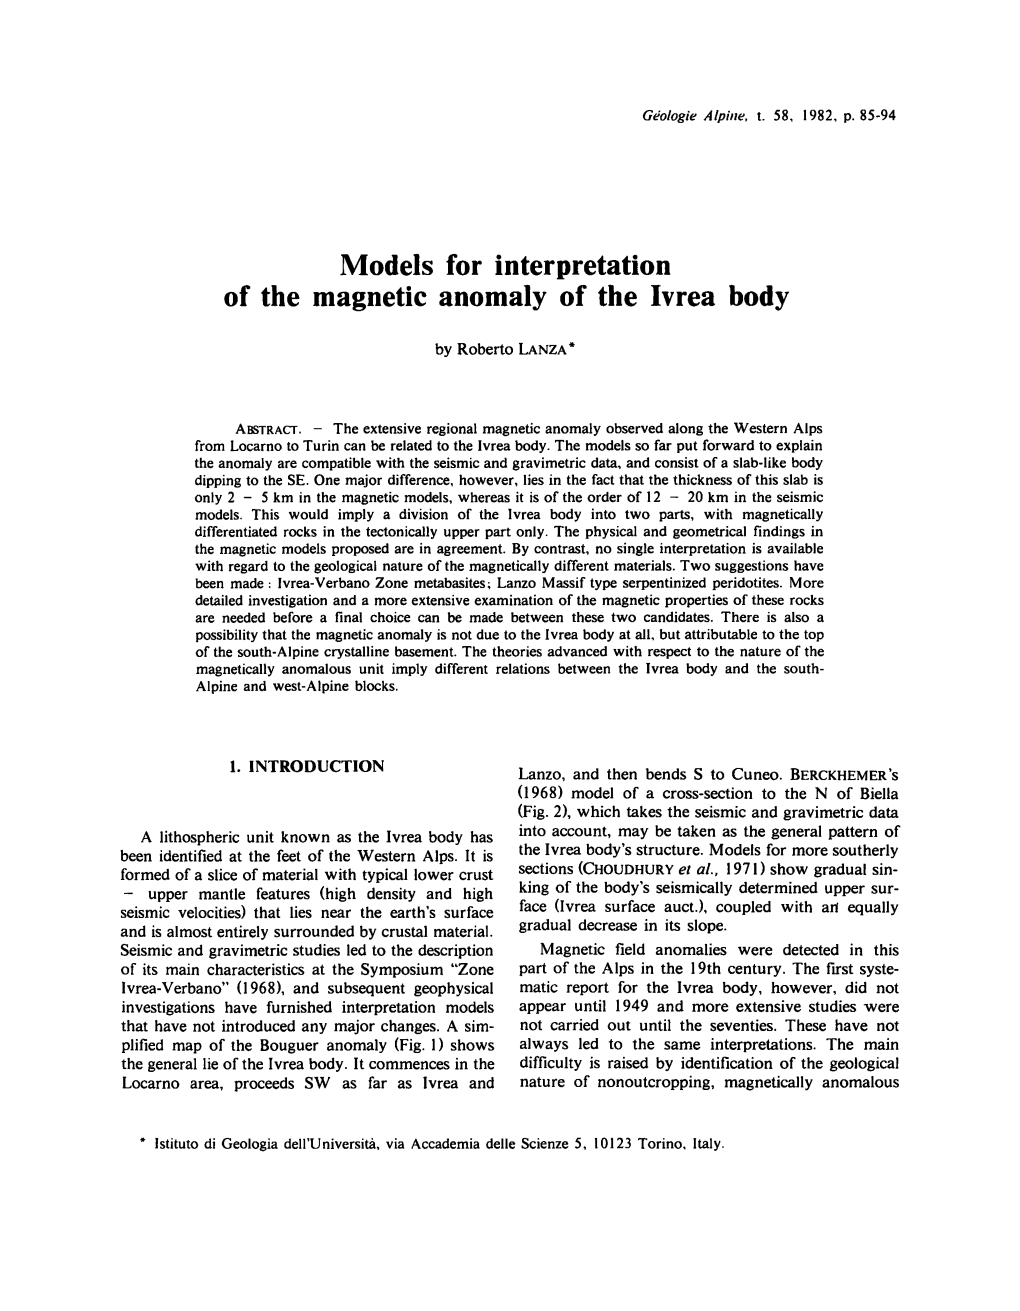 Models for Interprétation of the Magnetic Anomaly of the Ivrea Body